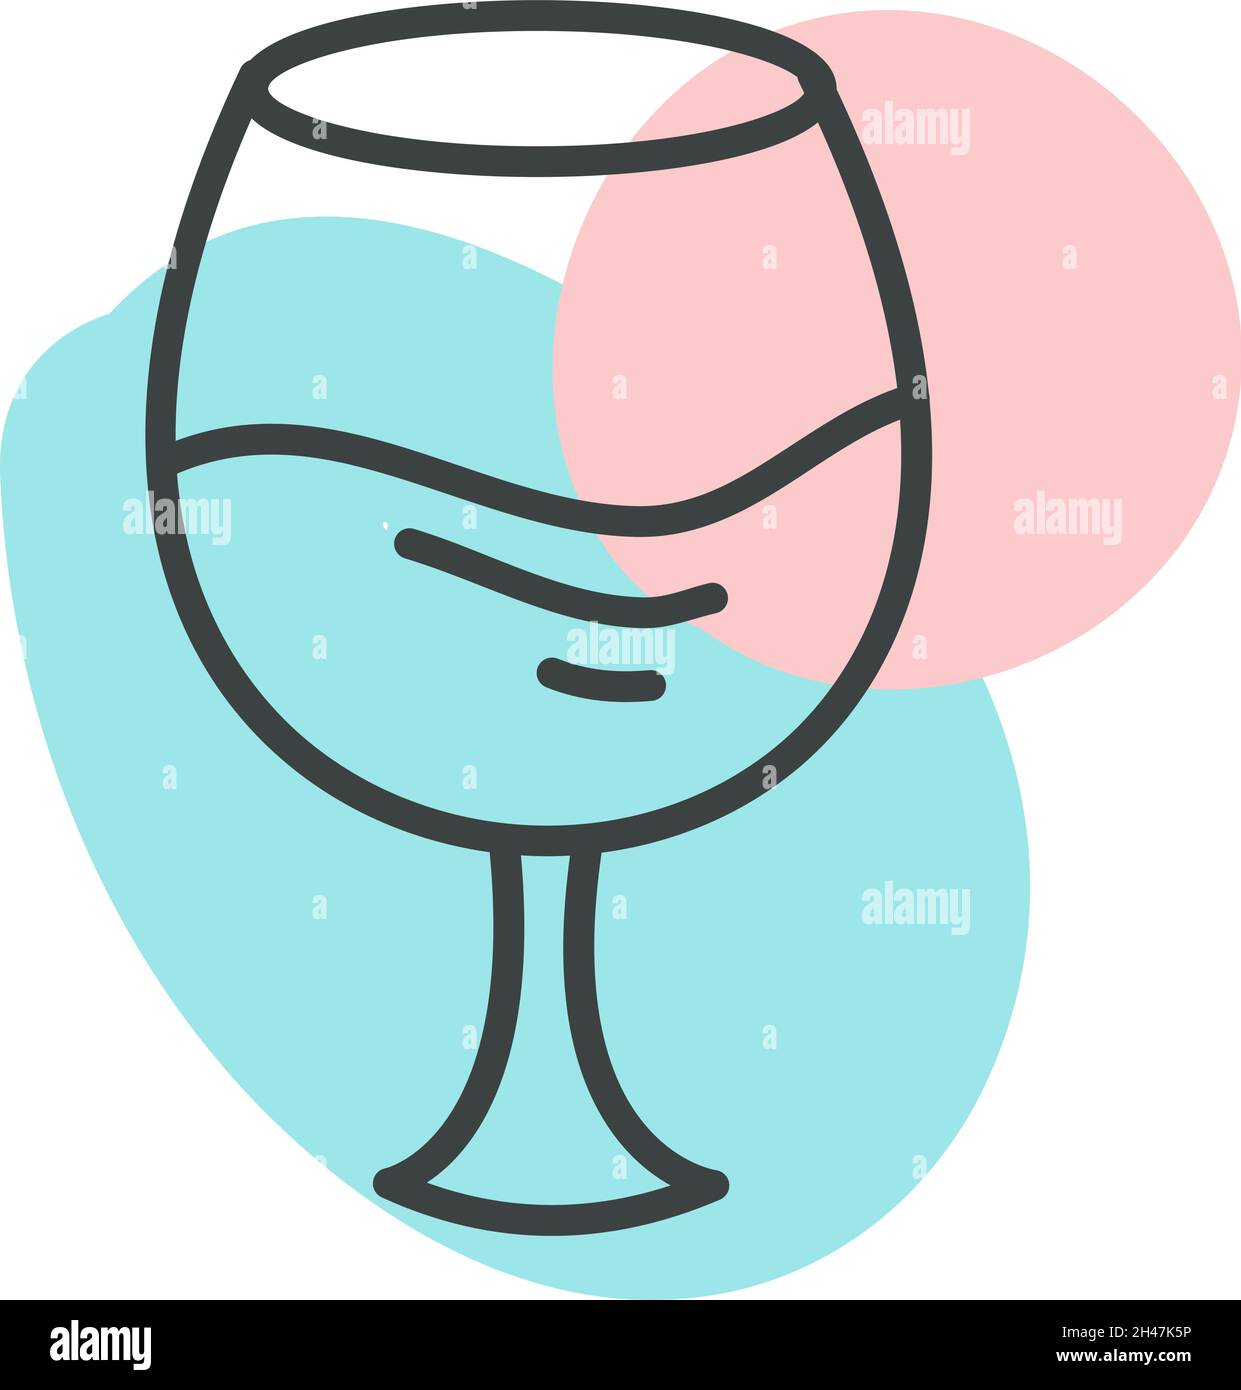 Colorful Cartoon Two Fancy Beer Glass Stock Vector - Illustration